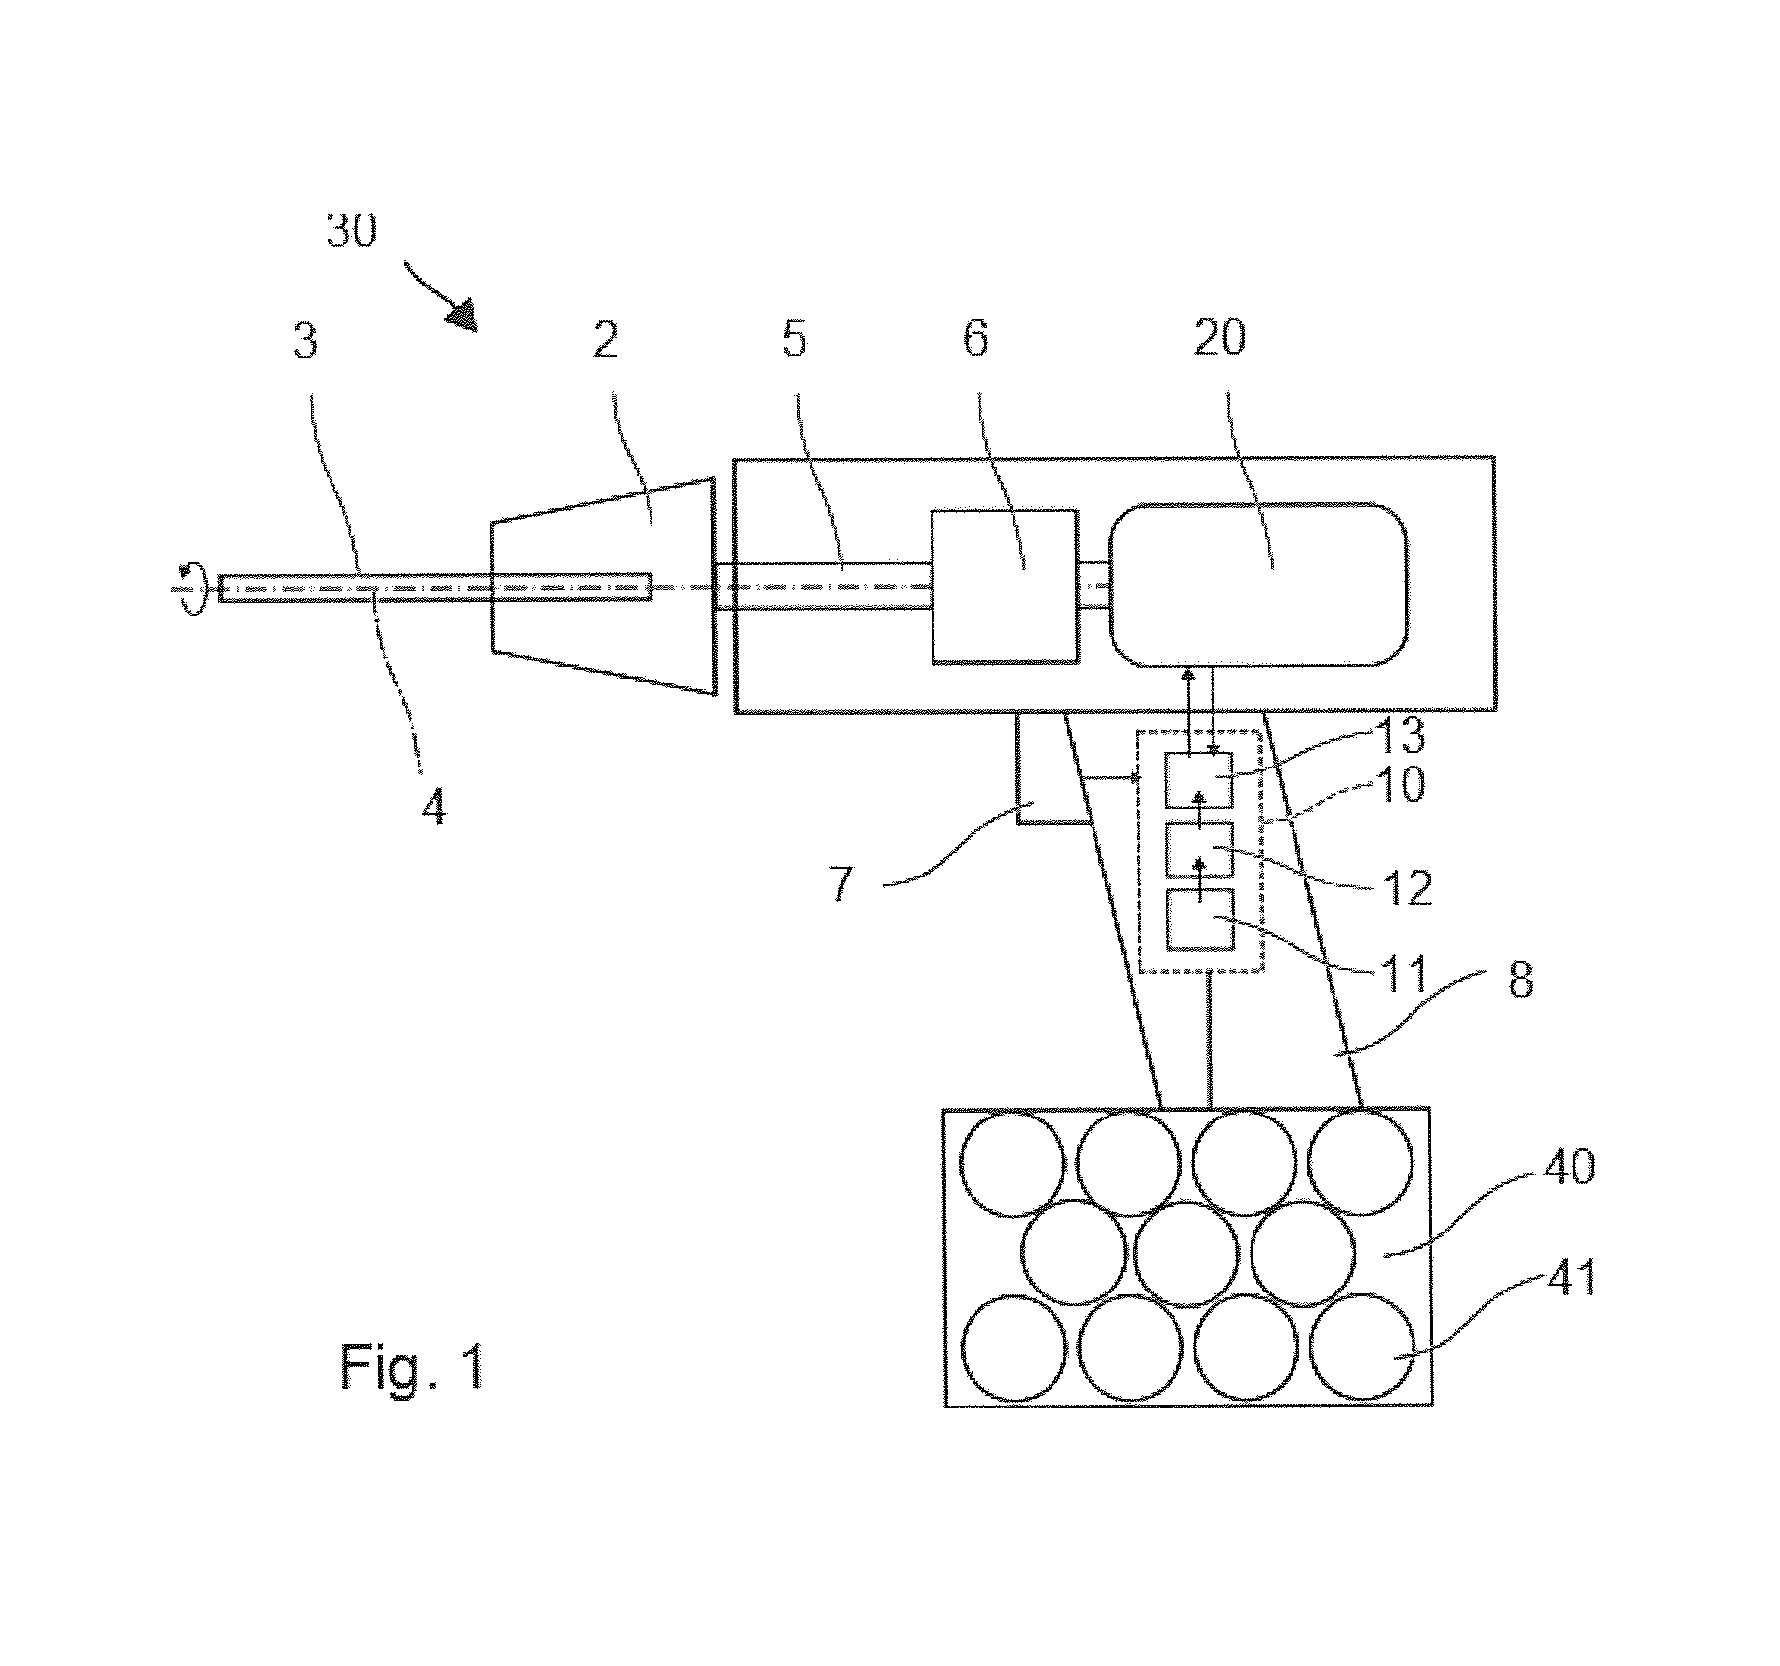 Method and device to regulate the electric motor of a handheld power tool